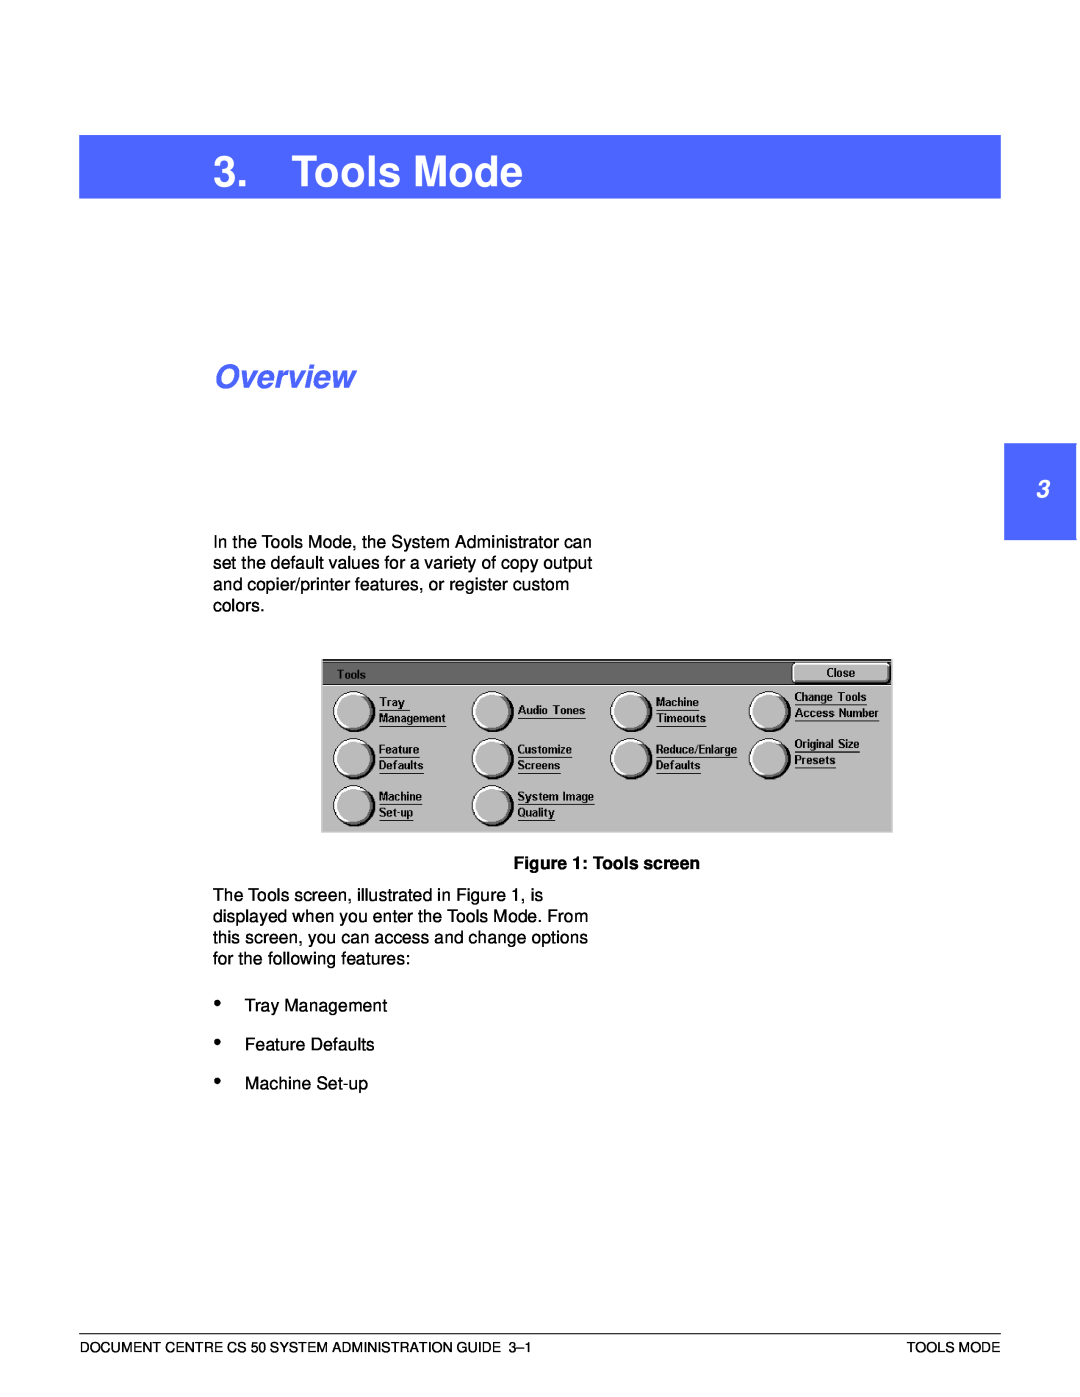 Xerox 50 manual Tools Mode, Overview, 1 2 3 4 5 6 7, Tools screen 